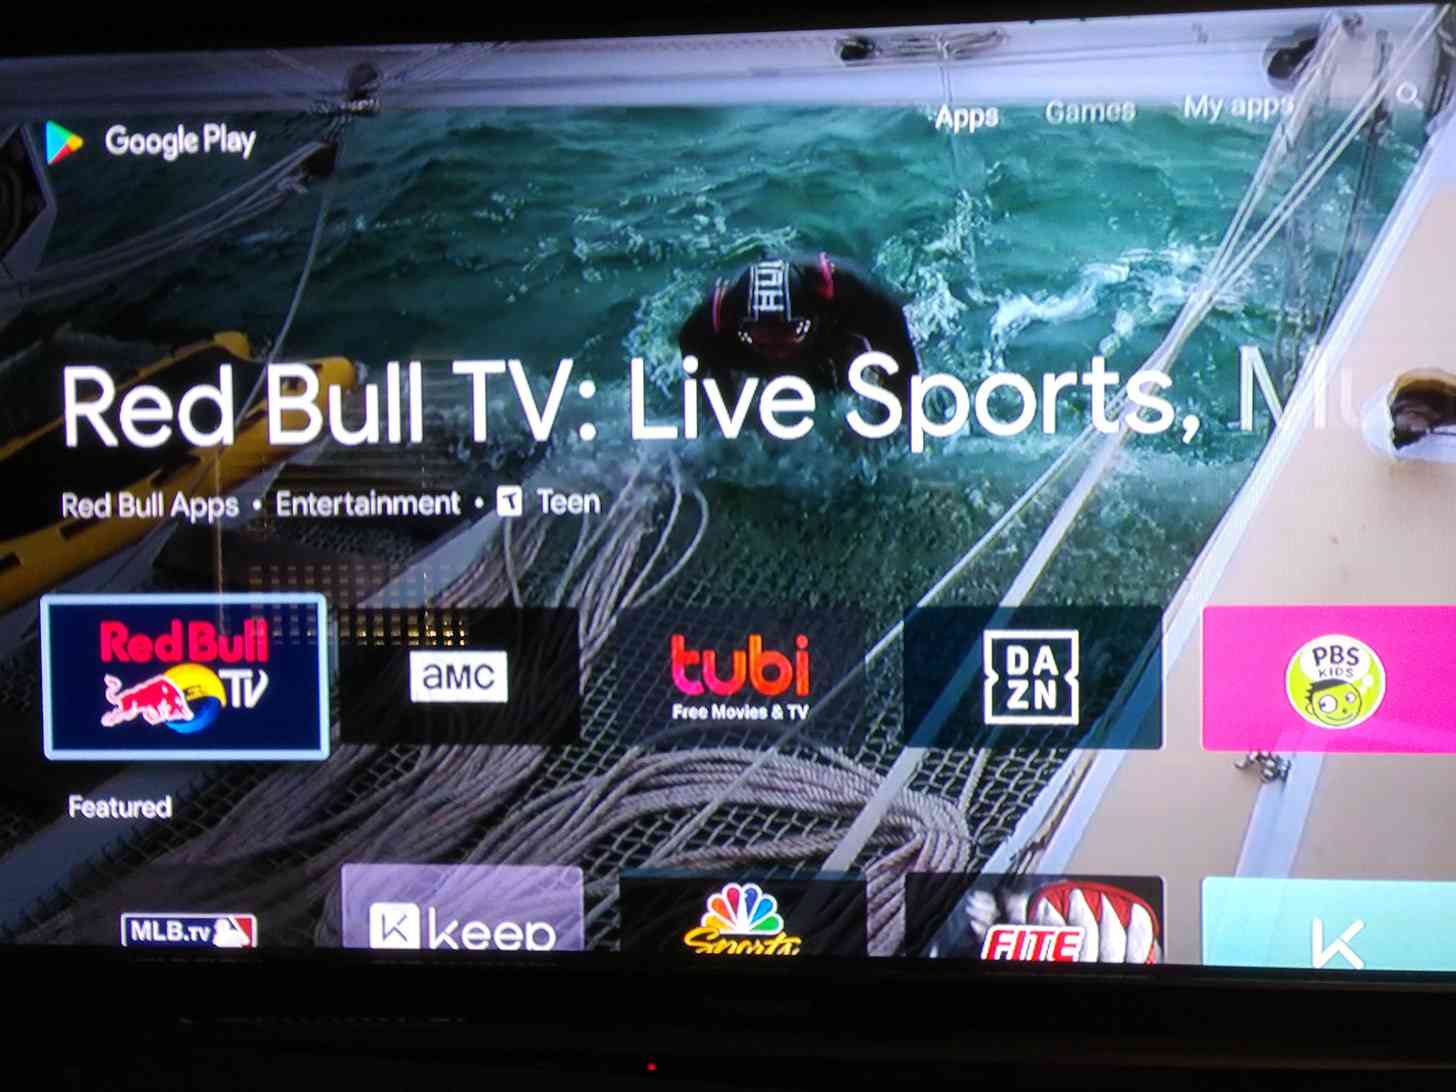 Android TV Play Store redesign